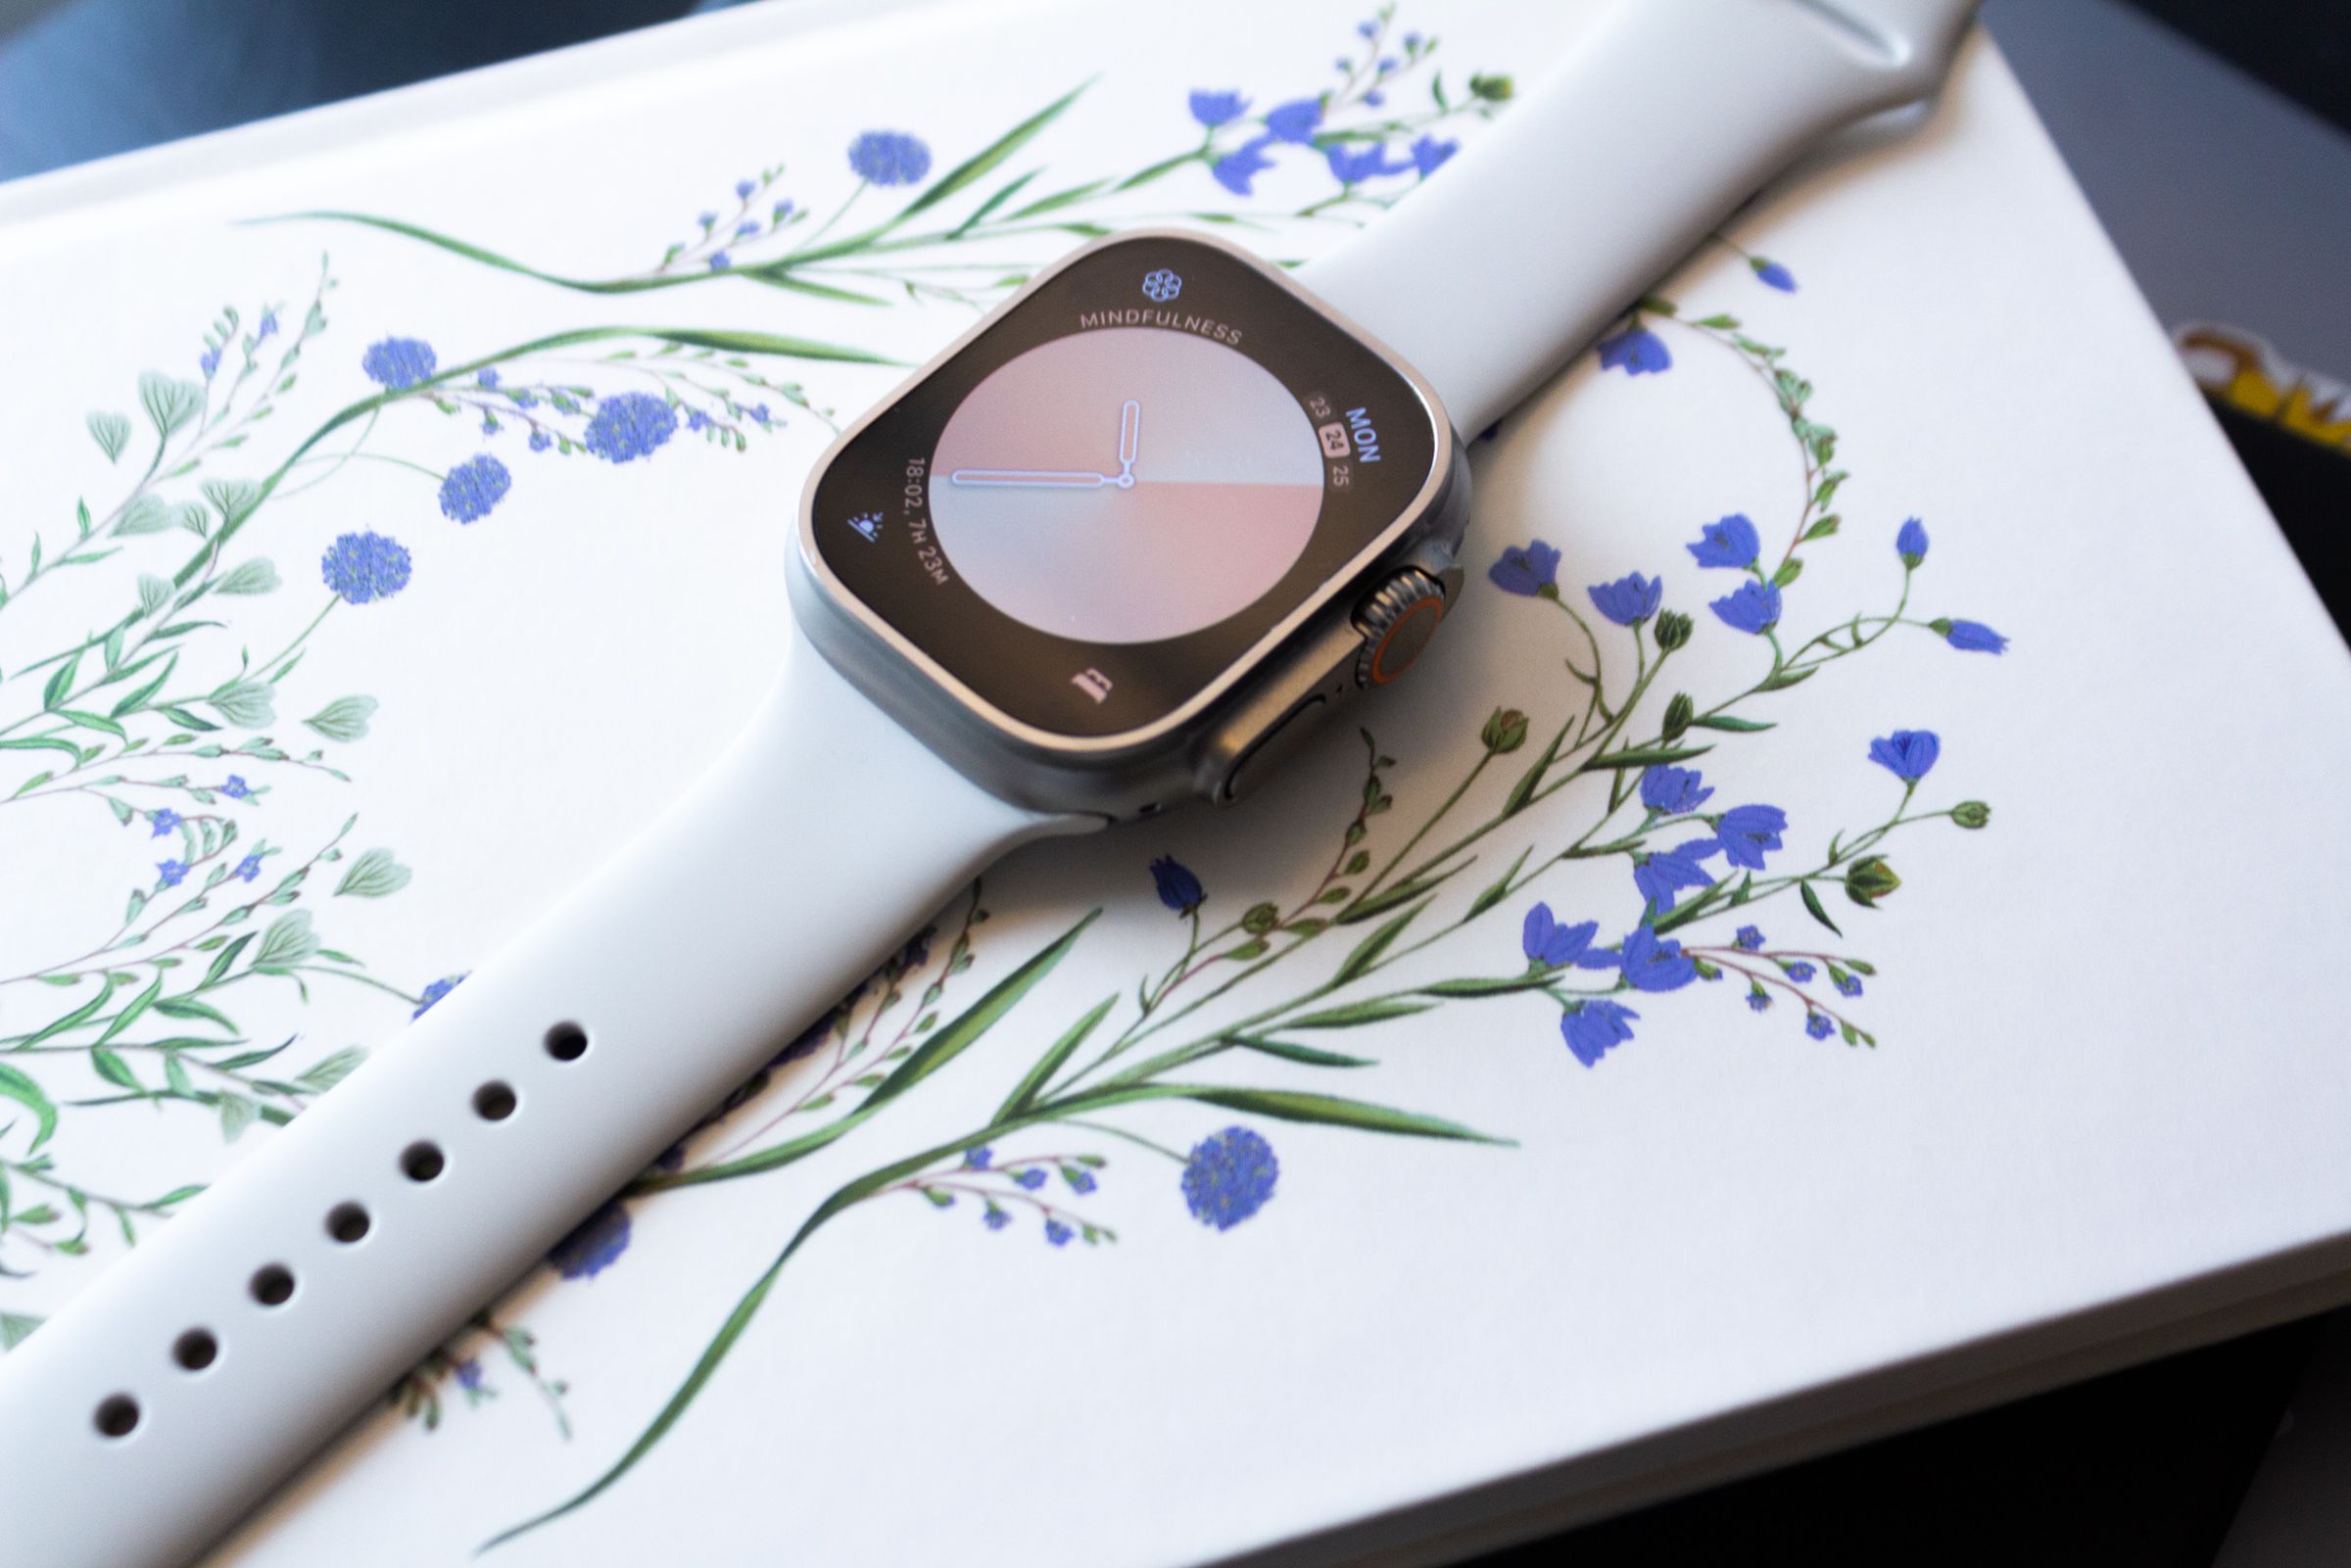 The Apple Watch Ultra with the 45mm Sport Band in Starlight on top of a book